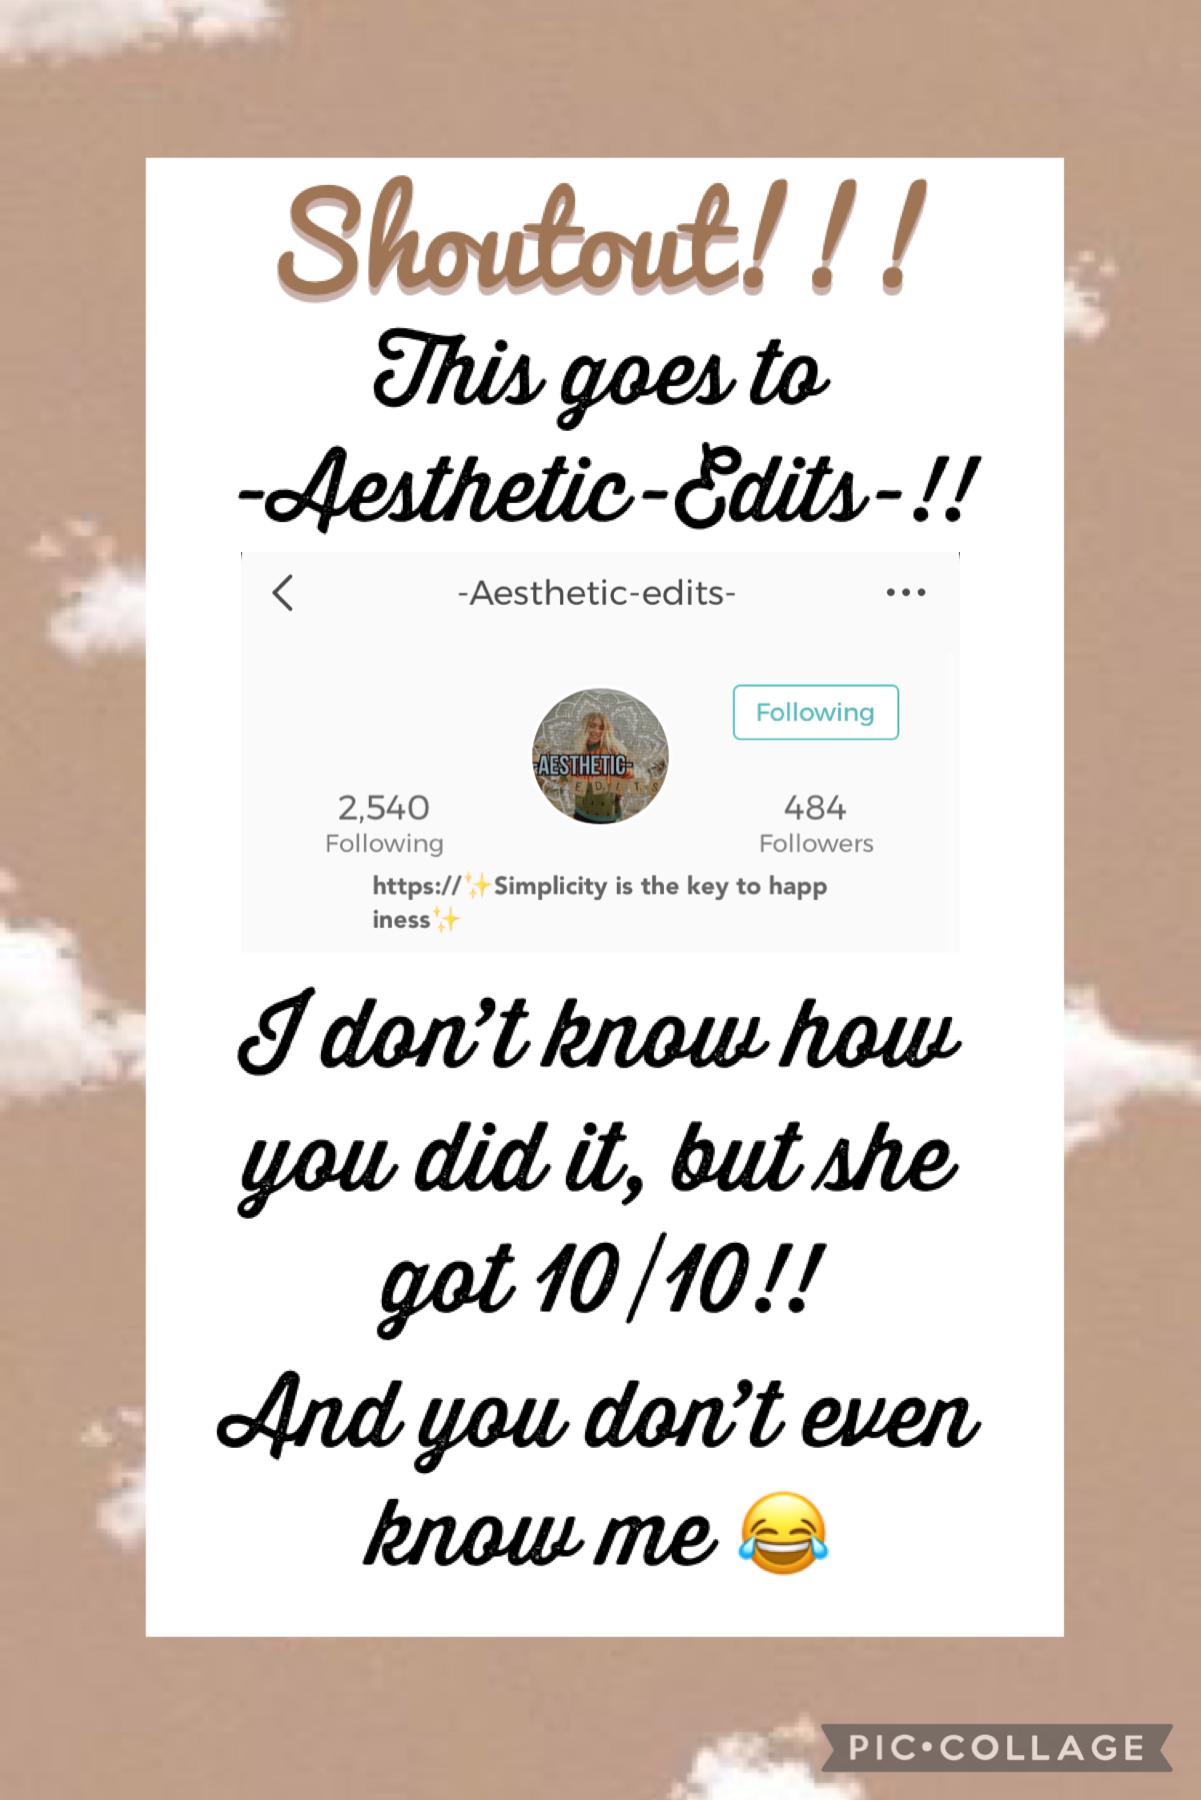 ☁️Shoutout☁️
This shoutout goes to -Aesthetic-Edits-!!! She got a 10/10 on my buddy meter quiz!! LIKE WHAT?! You don’t even know me 😂 Havw a blessed day!! And sorry if I post a lot today, I’m trying to catch up 😅